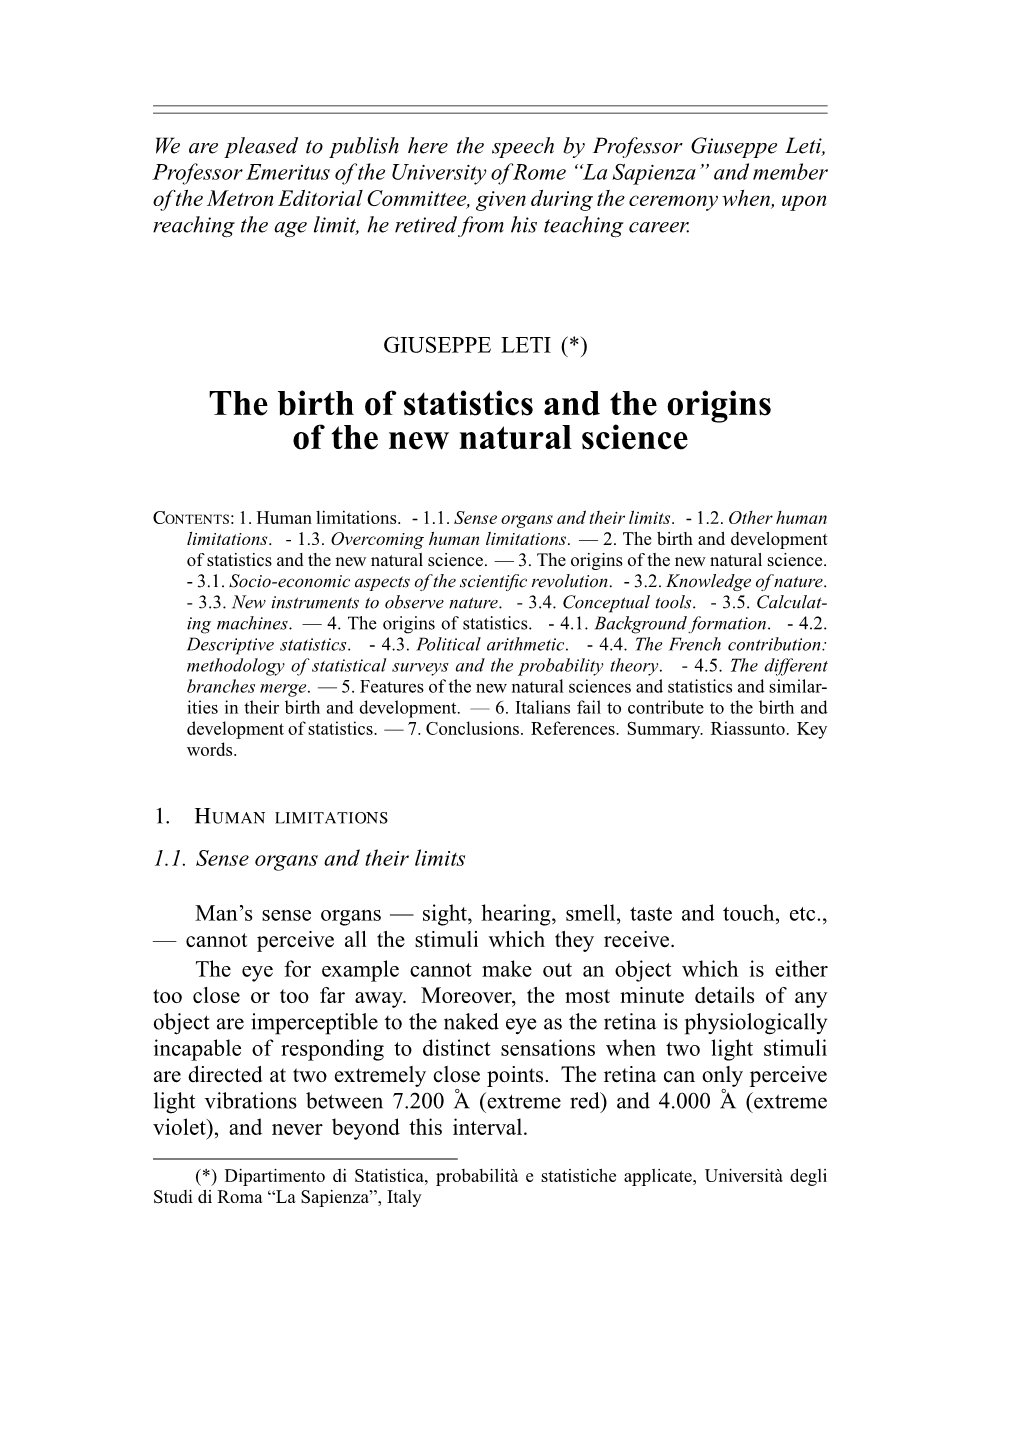 The Birth of Statistics and the Origins of the New Natural Science